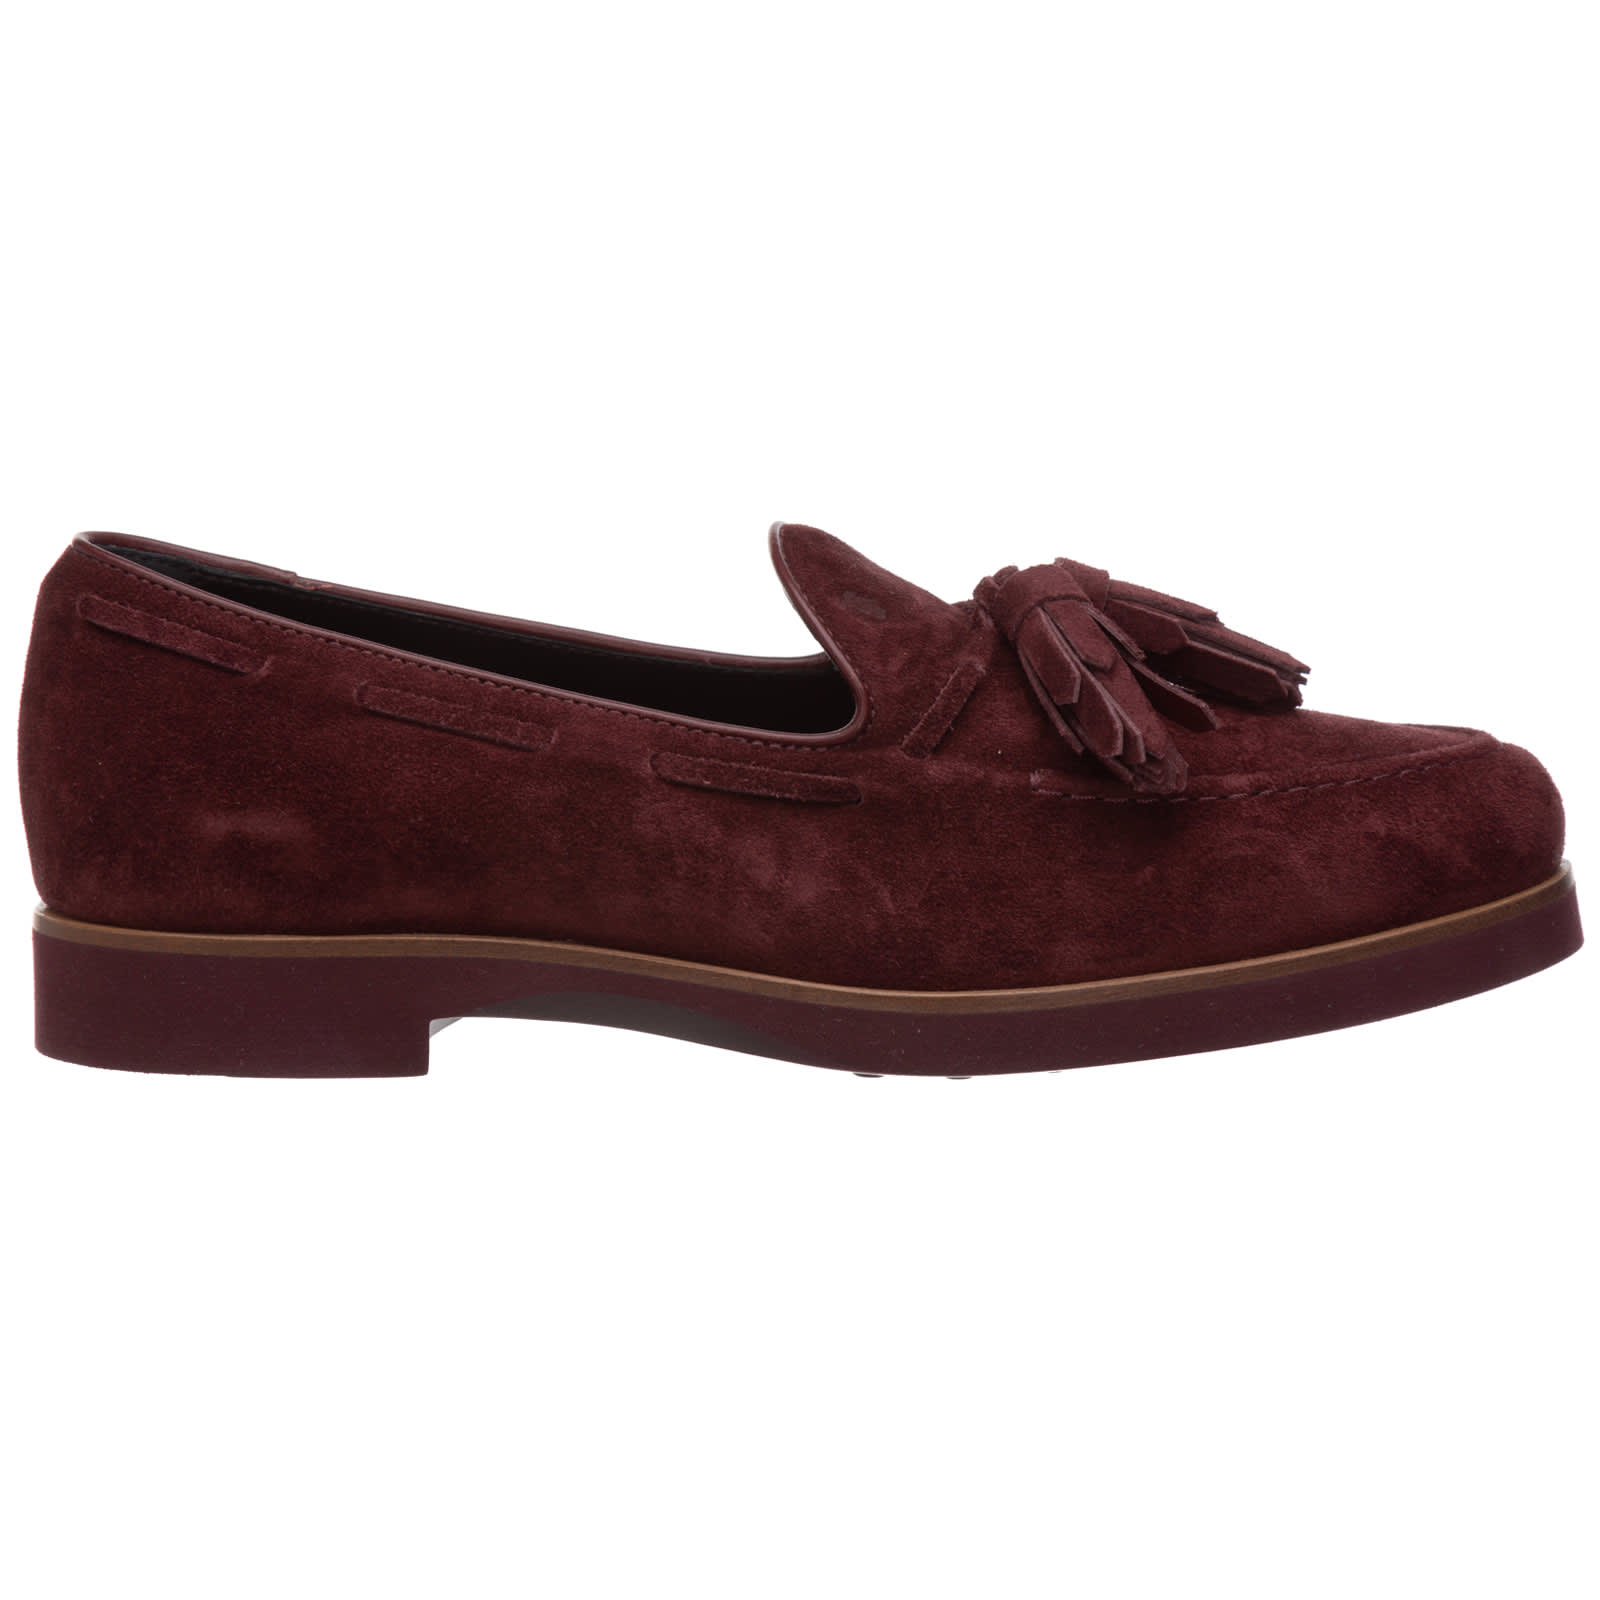 Tods Double T Moccasins